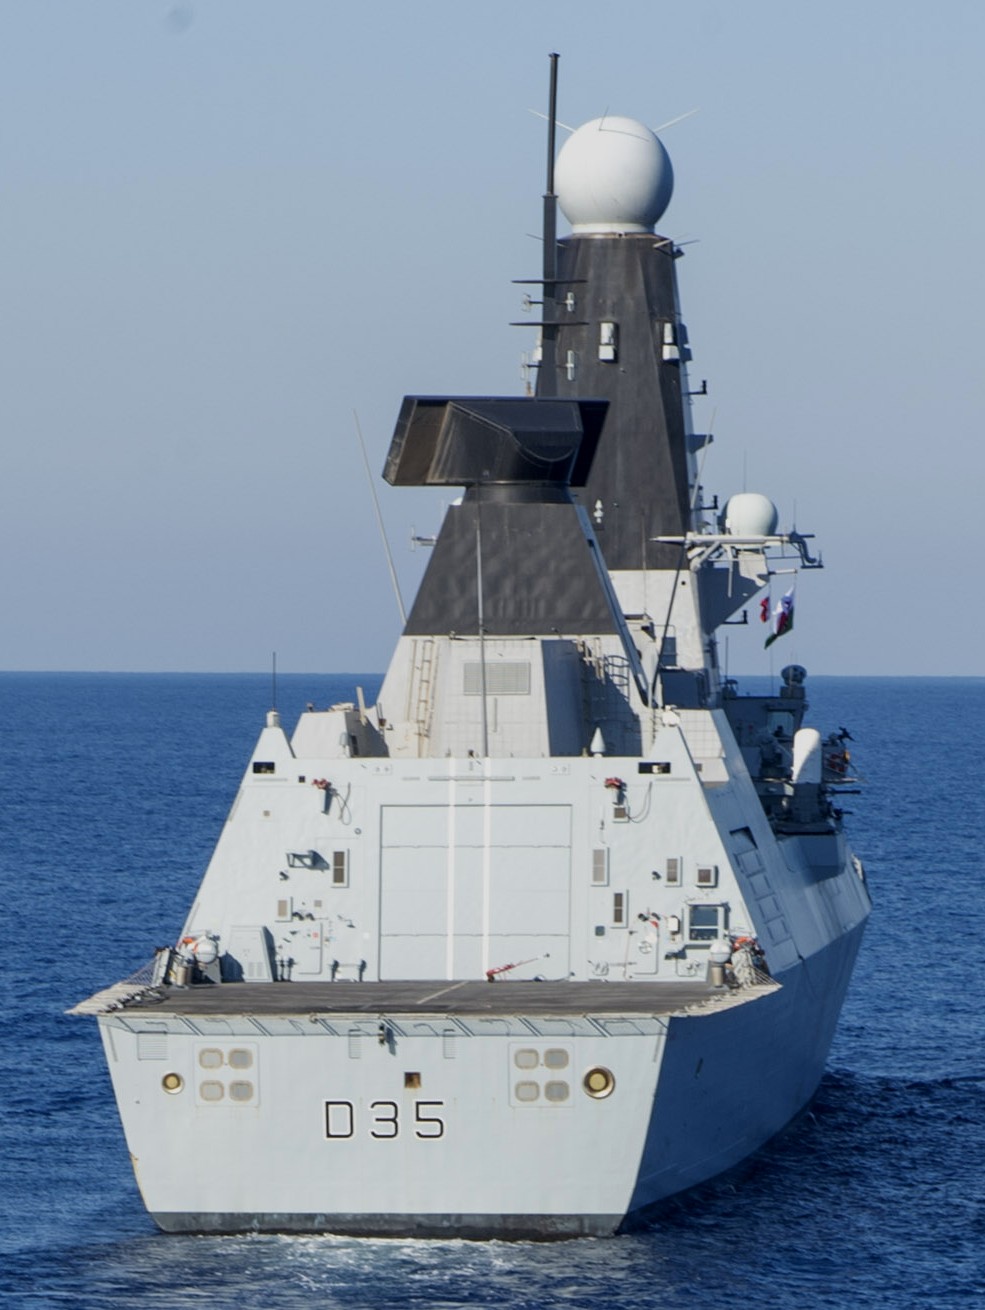 hms dragon d-35 type 45 daring class guided missile destroyer ddg royal navy sea viper paams 33 flight deck hangar